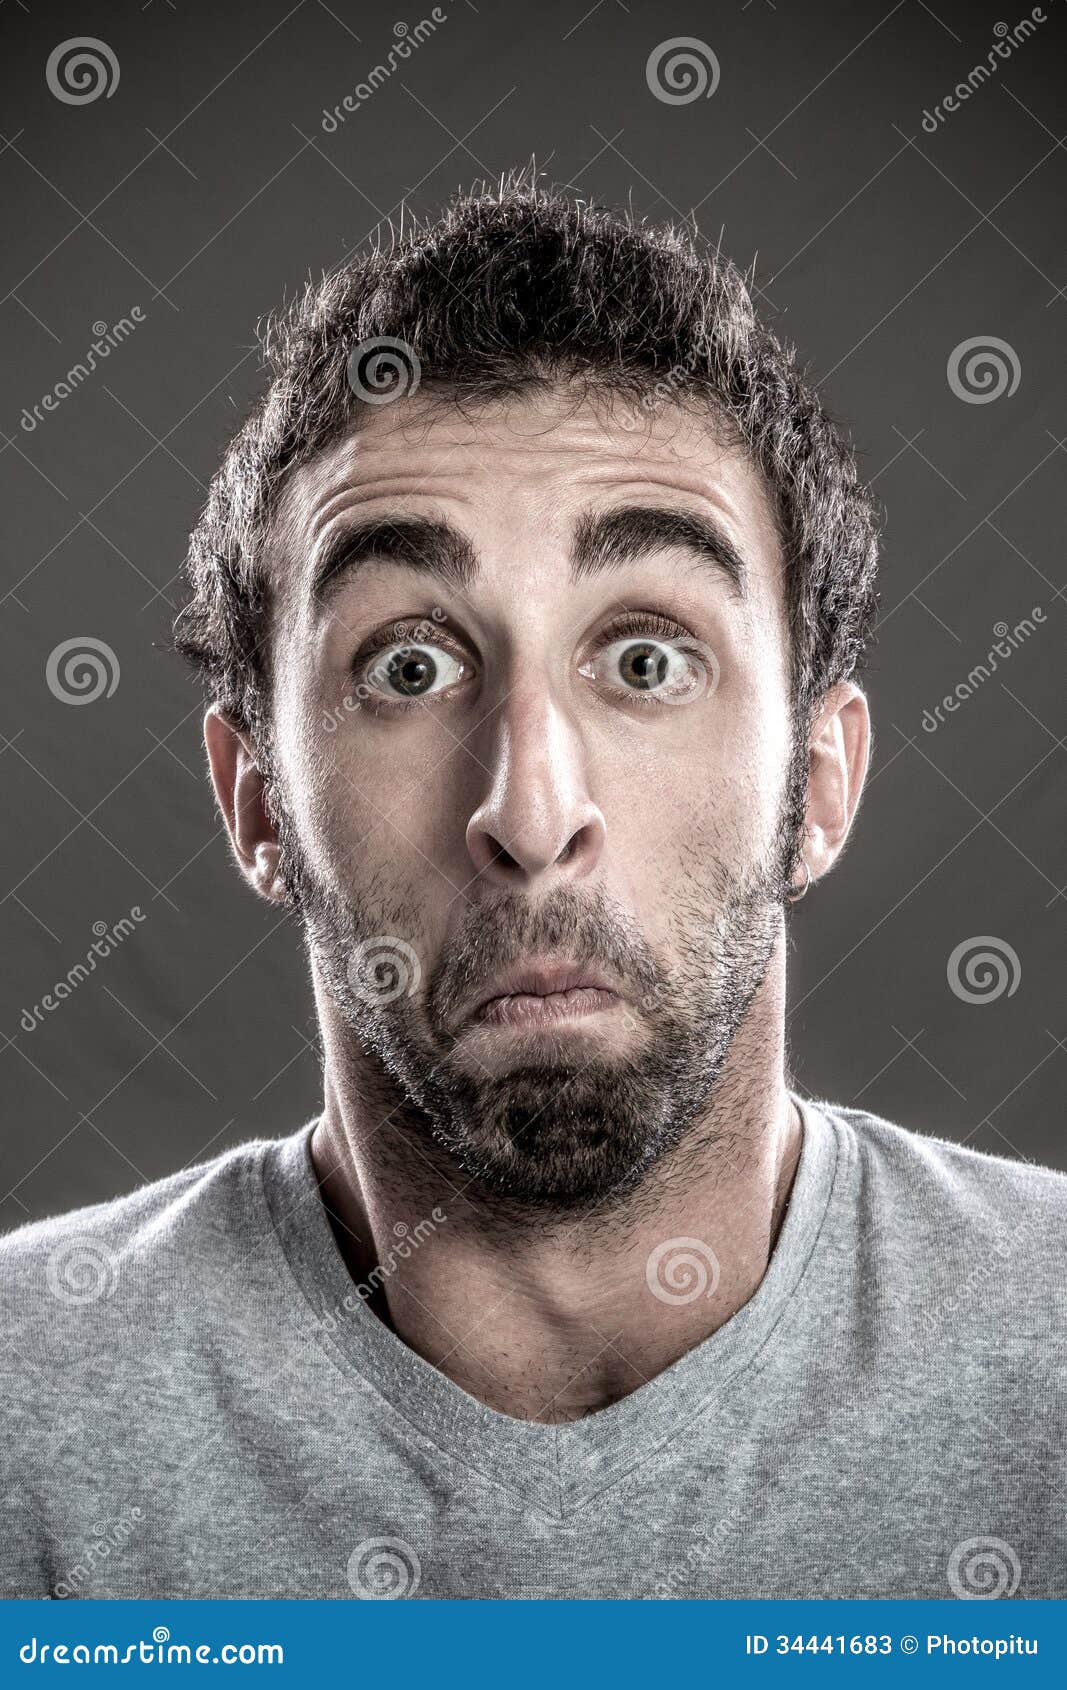 Man doubting stock image. Image of face, casual, front - 34441683